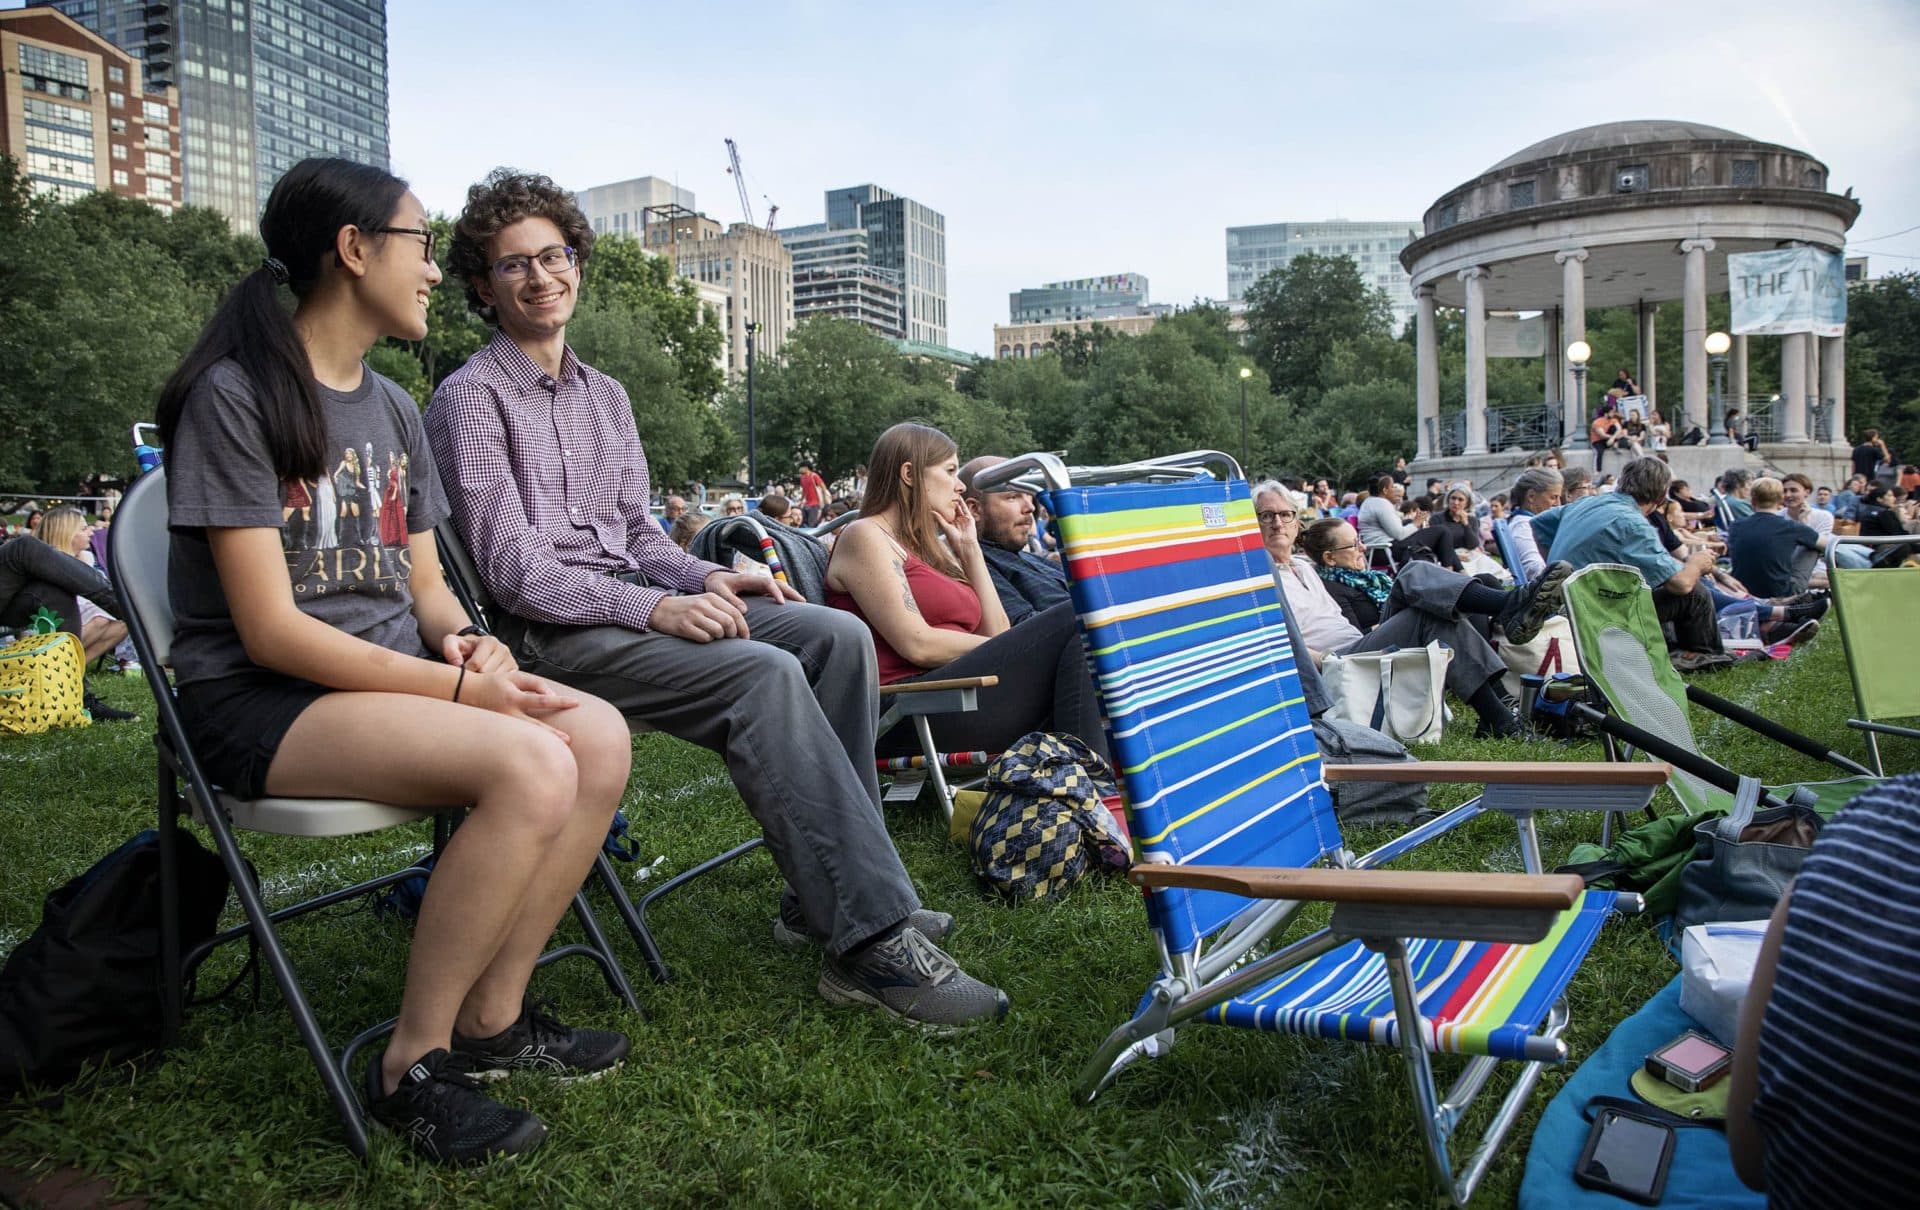 As evening falls, Northeastern students Sam Wohlever and Amanda Dee wait for the start of the &quot;The Tempest&quot; on Boston Common. (Robin Lubbock/WBUR)